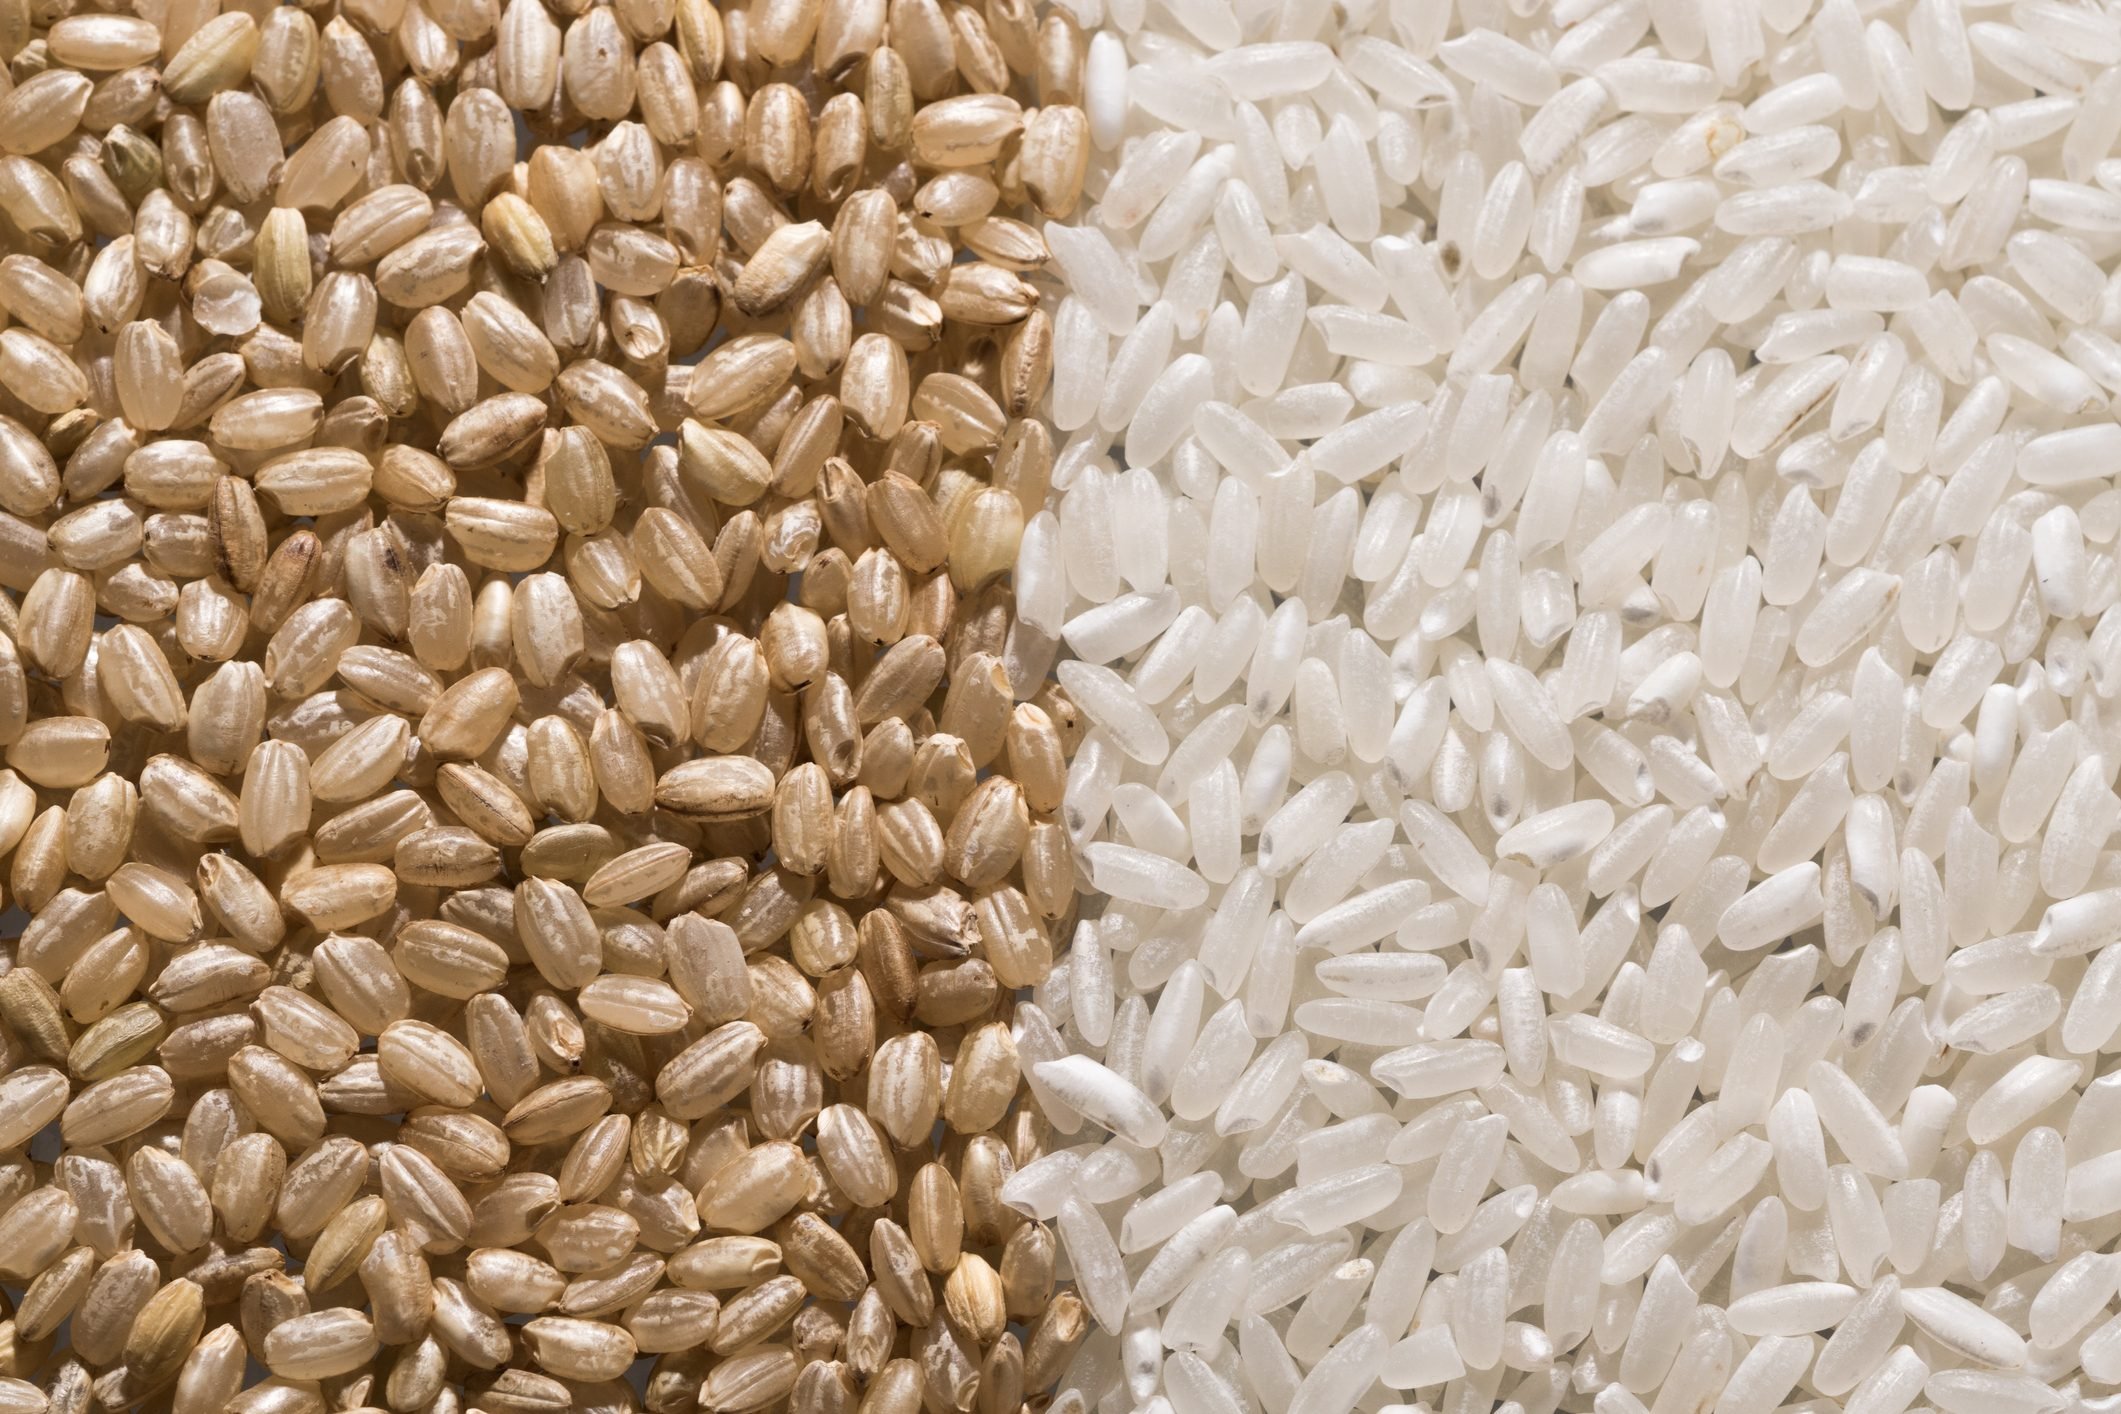 Brown Rice vs. White Rice: Which Is Healthier?